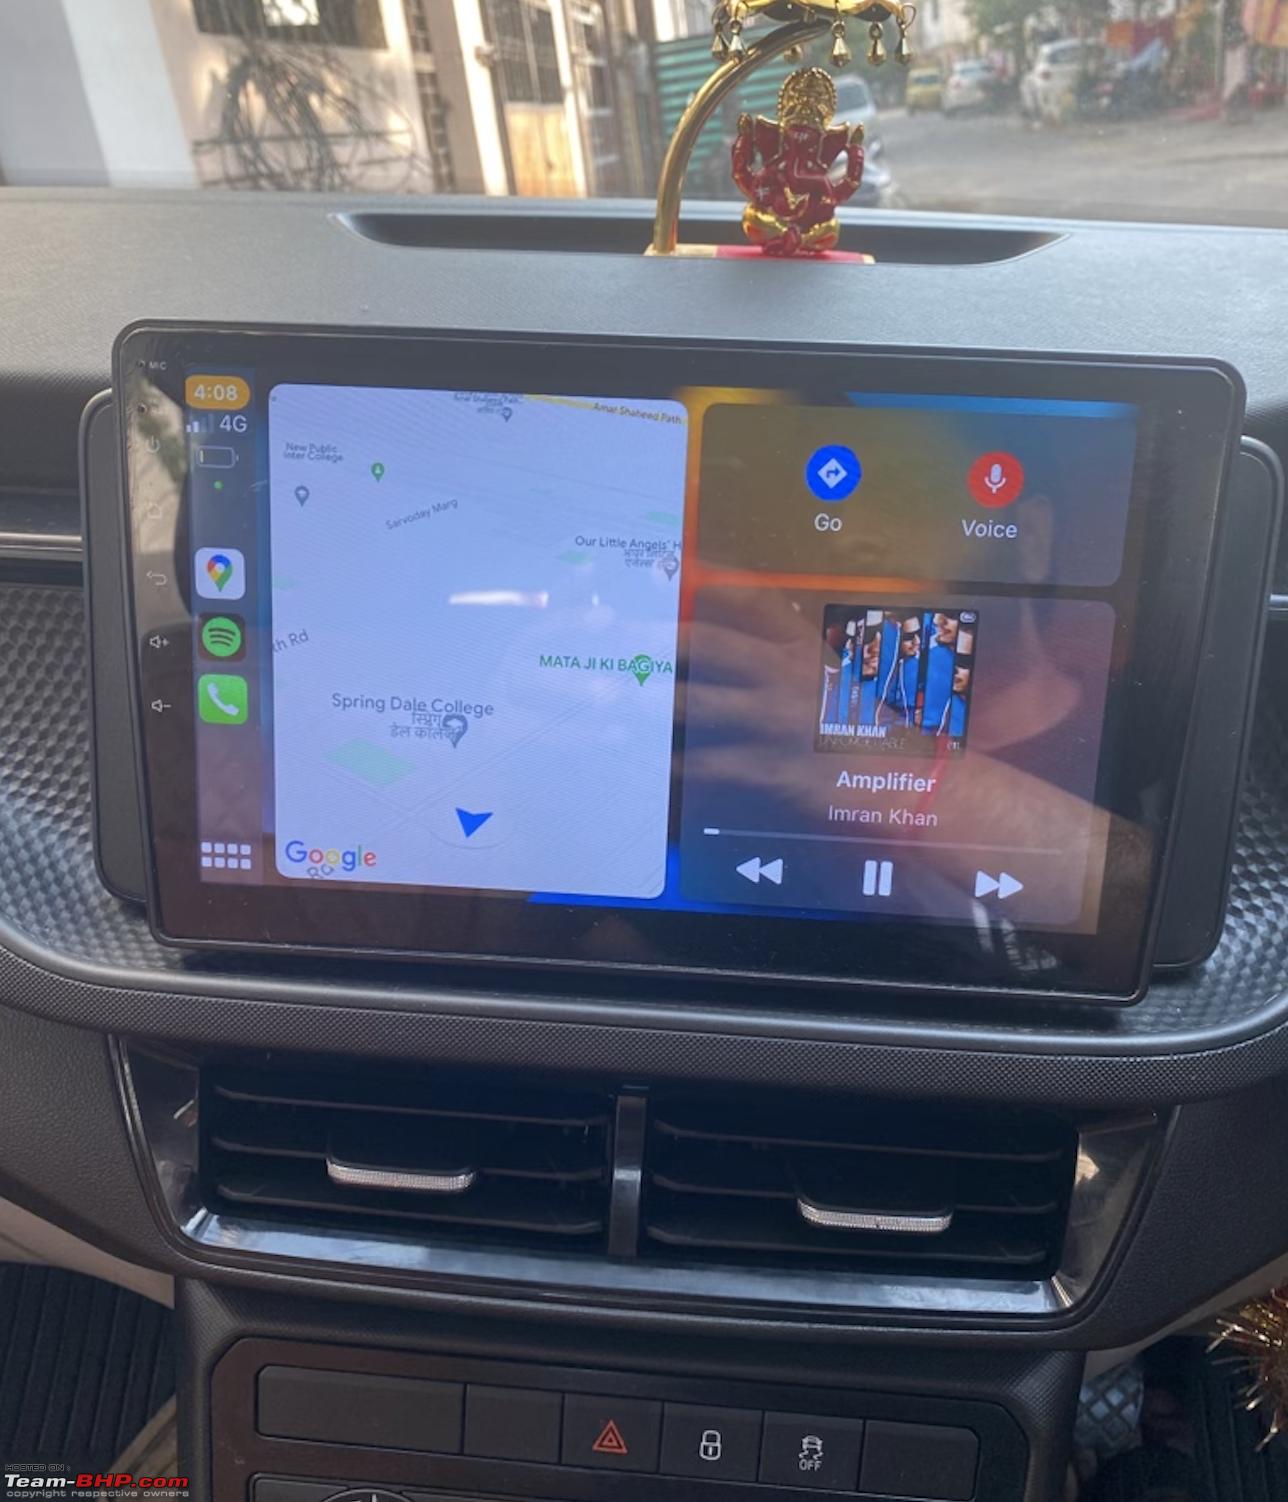 How to connect Android auto by Carlink application. 